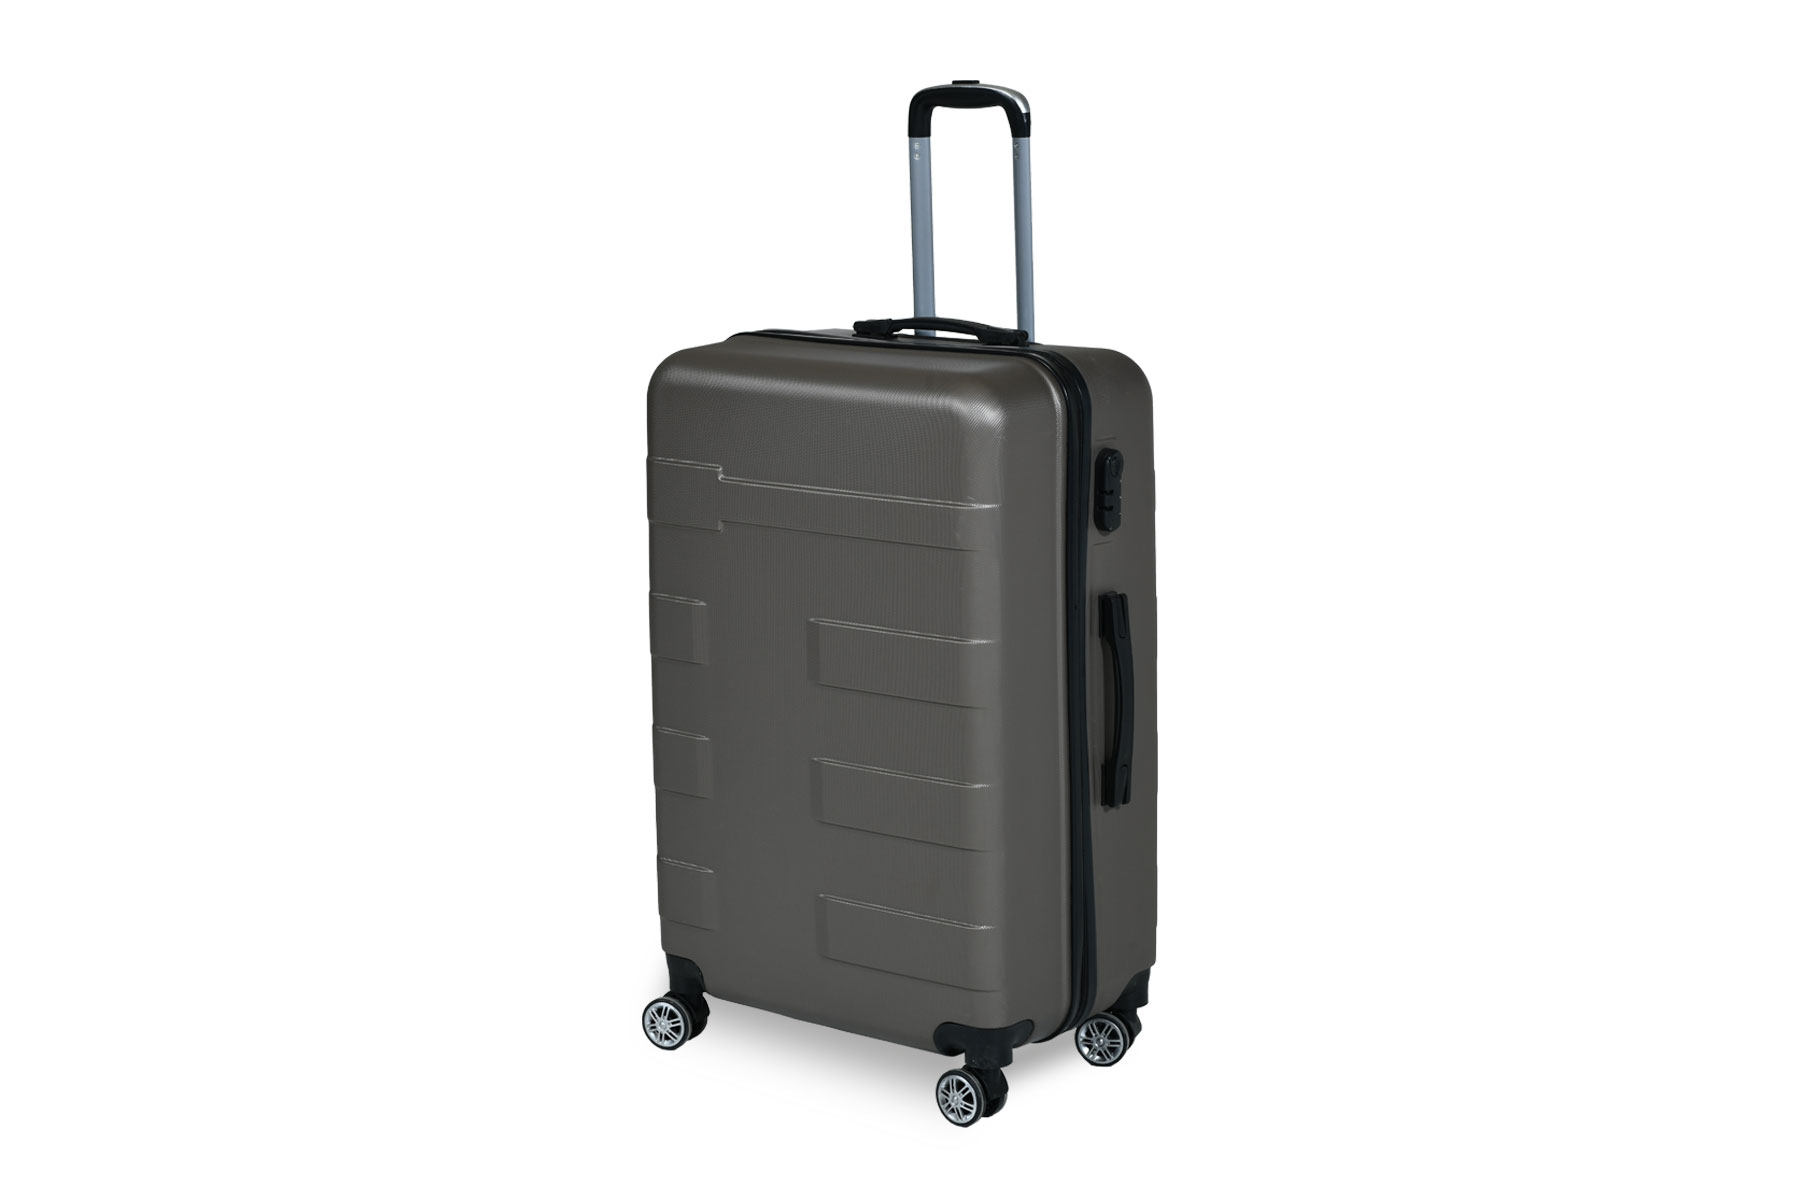 LUGGAGE - TROLLEY SUITCASE 24''